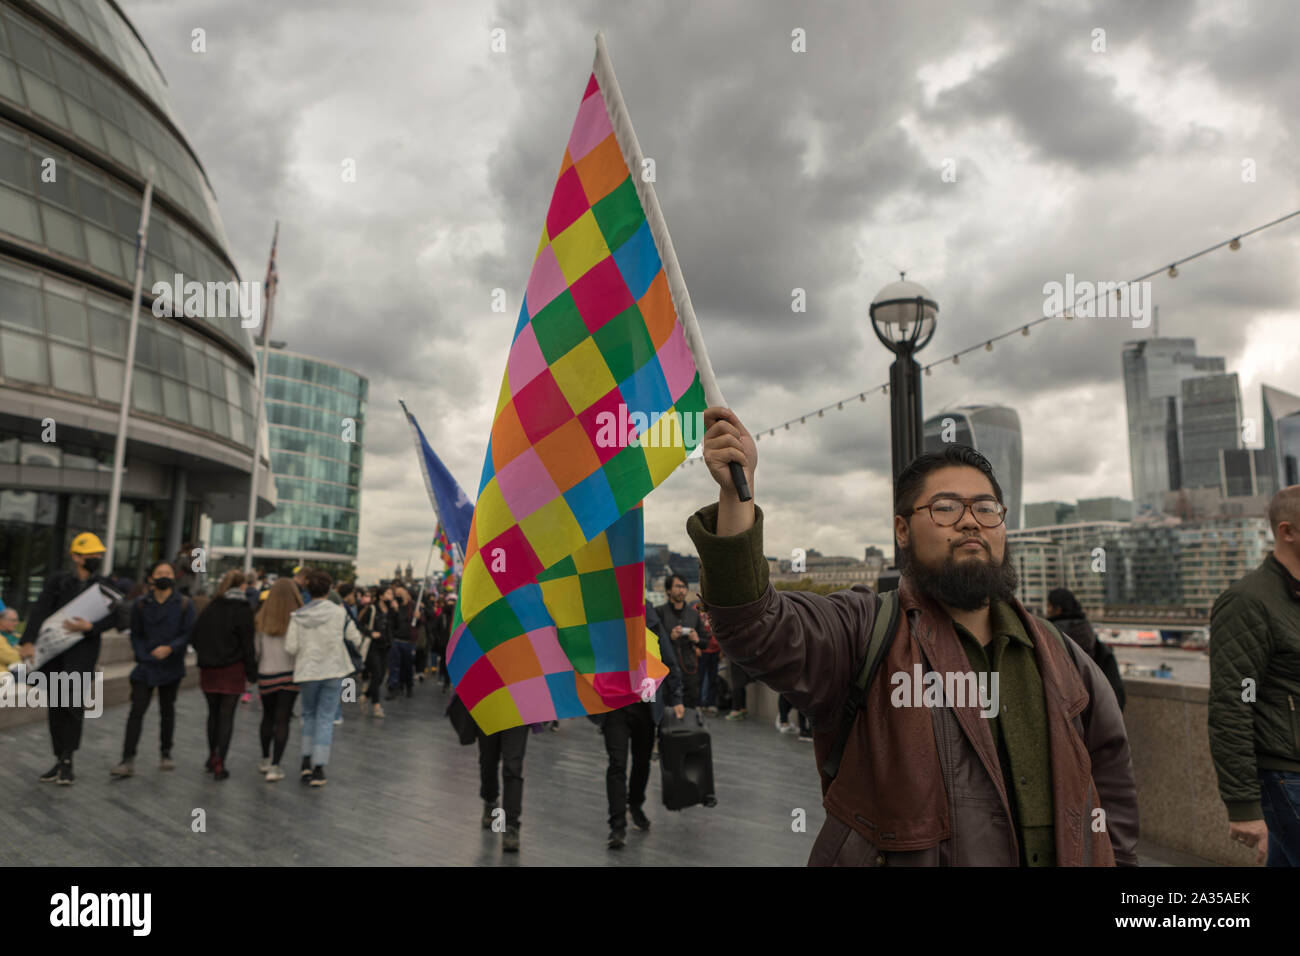 London, UK. 5th Oct, 2019. Chinese artist Badiucao and supporters join hands in a human chain, a showing of solidarity with protesters in Hong Kong. The Lennon Wall flag, symbolising Hong Kongs fight for freedom is also symbolically raised. Penelope Barritt/Alamy Live News Stock Photo